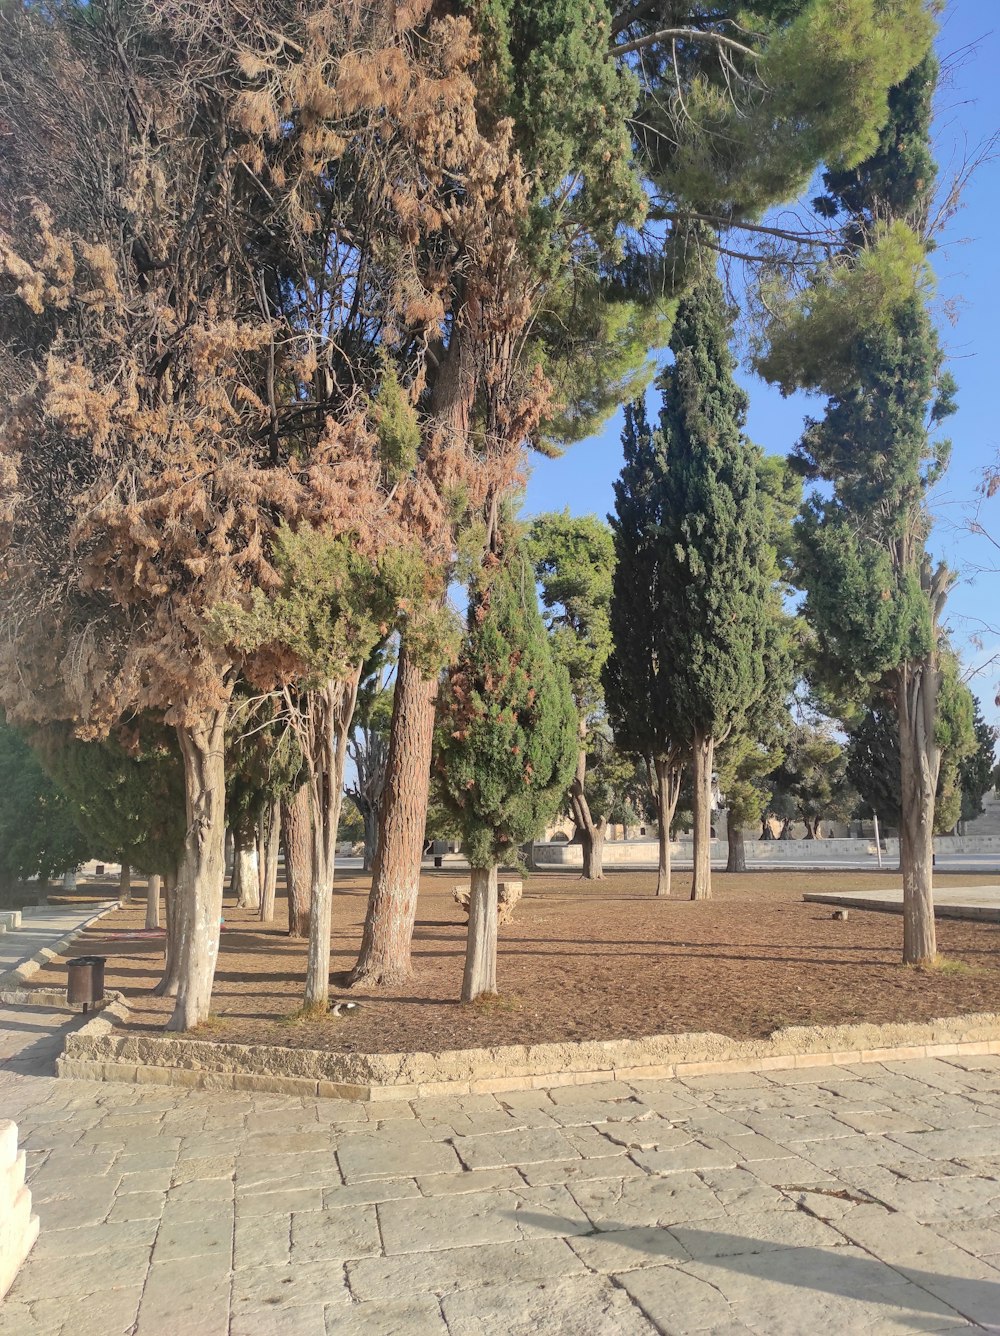 a park area with benches, trees, and dirt